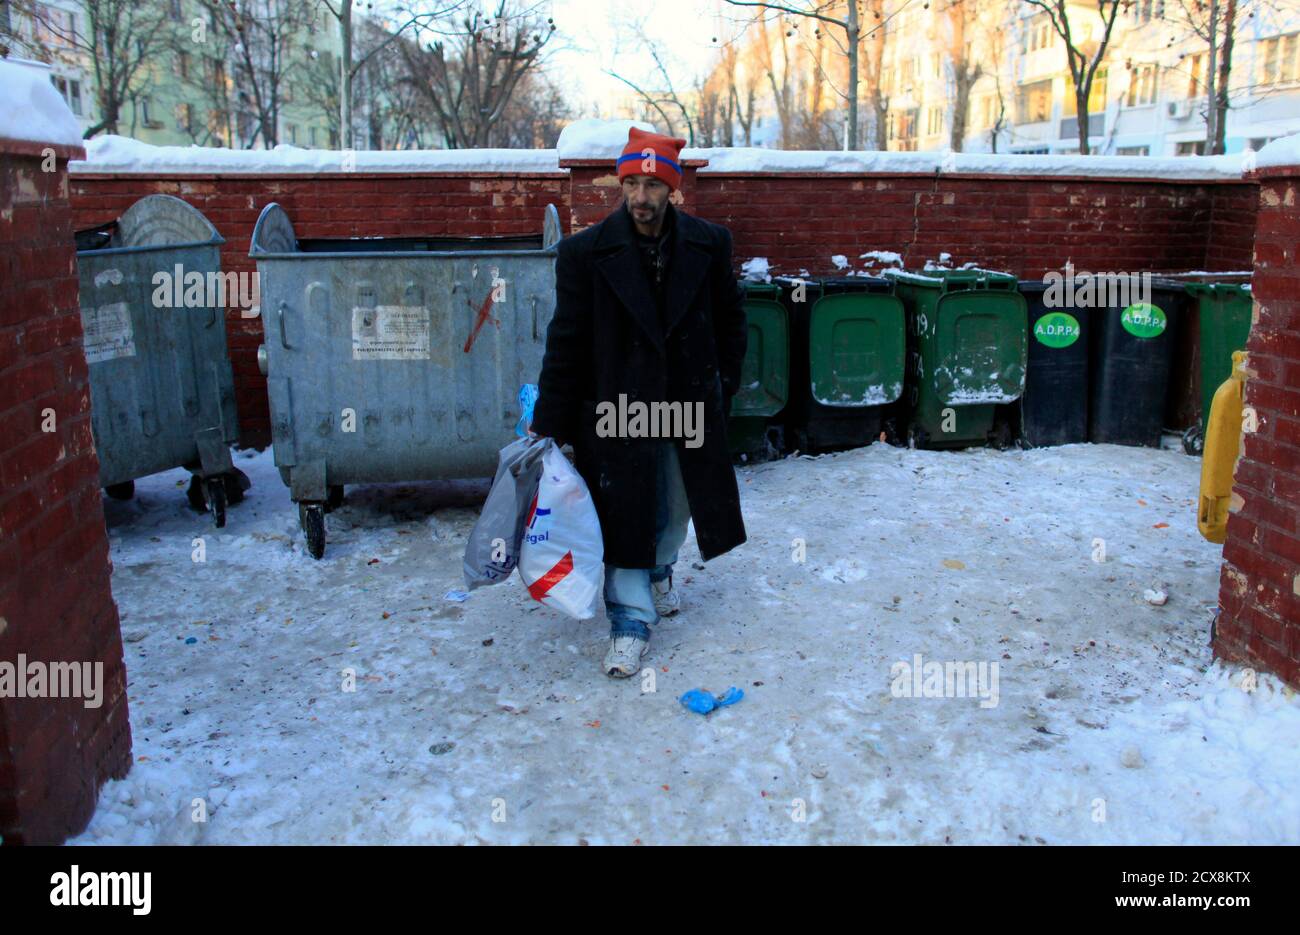 Homeless man Aurel Zugravu, 42, who refused to go to a community shelter,  leaves after picking through garbage bins in Bucharest February 1, 2012.  Local police and authorities are trying to relocate